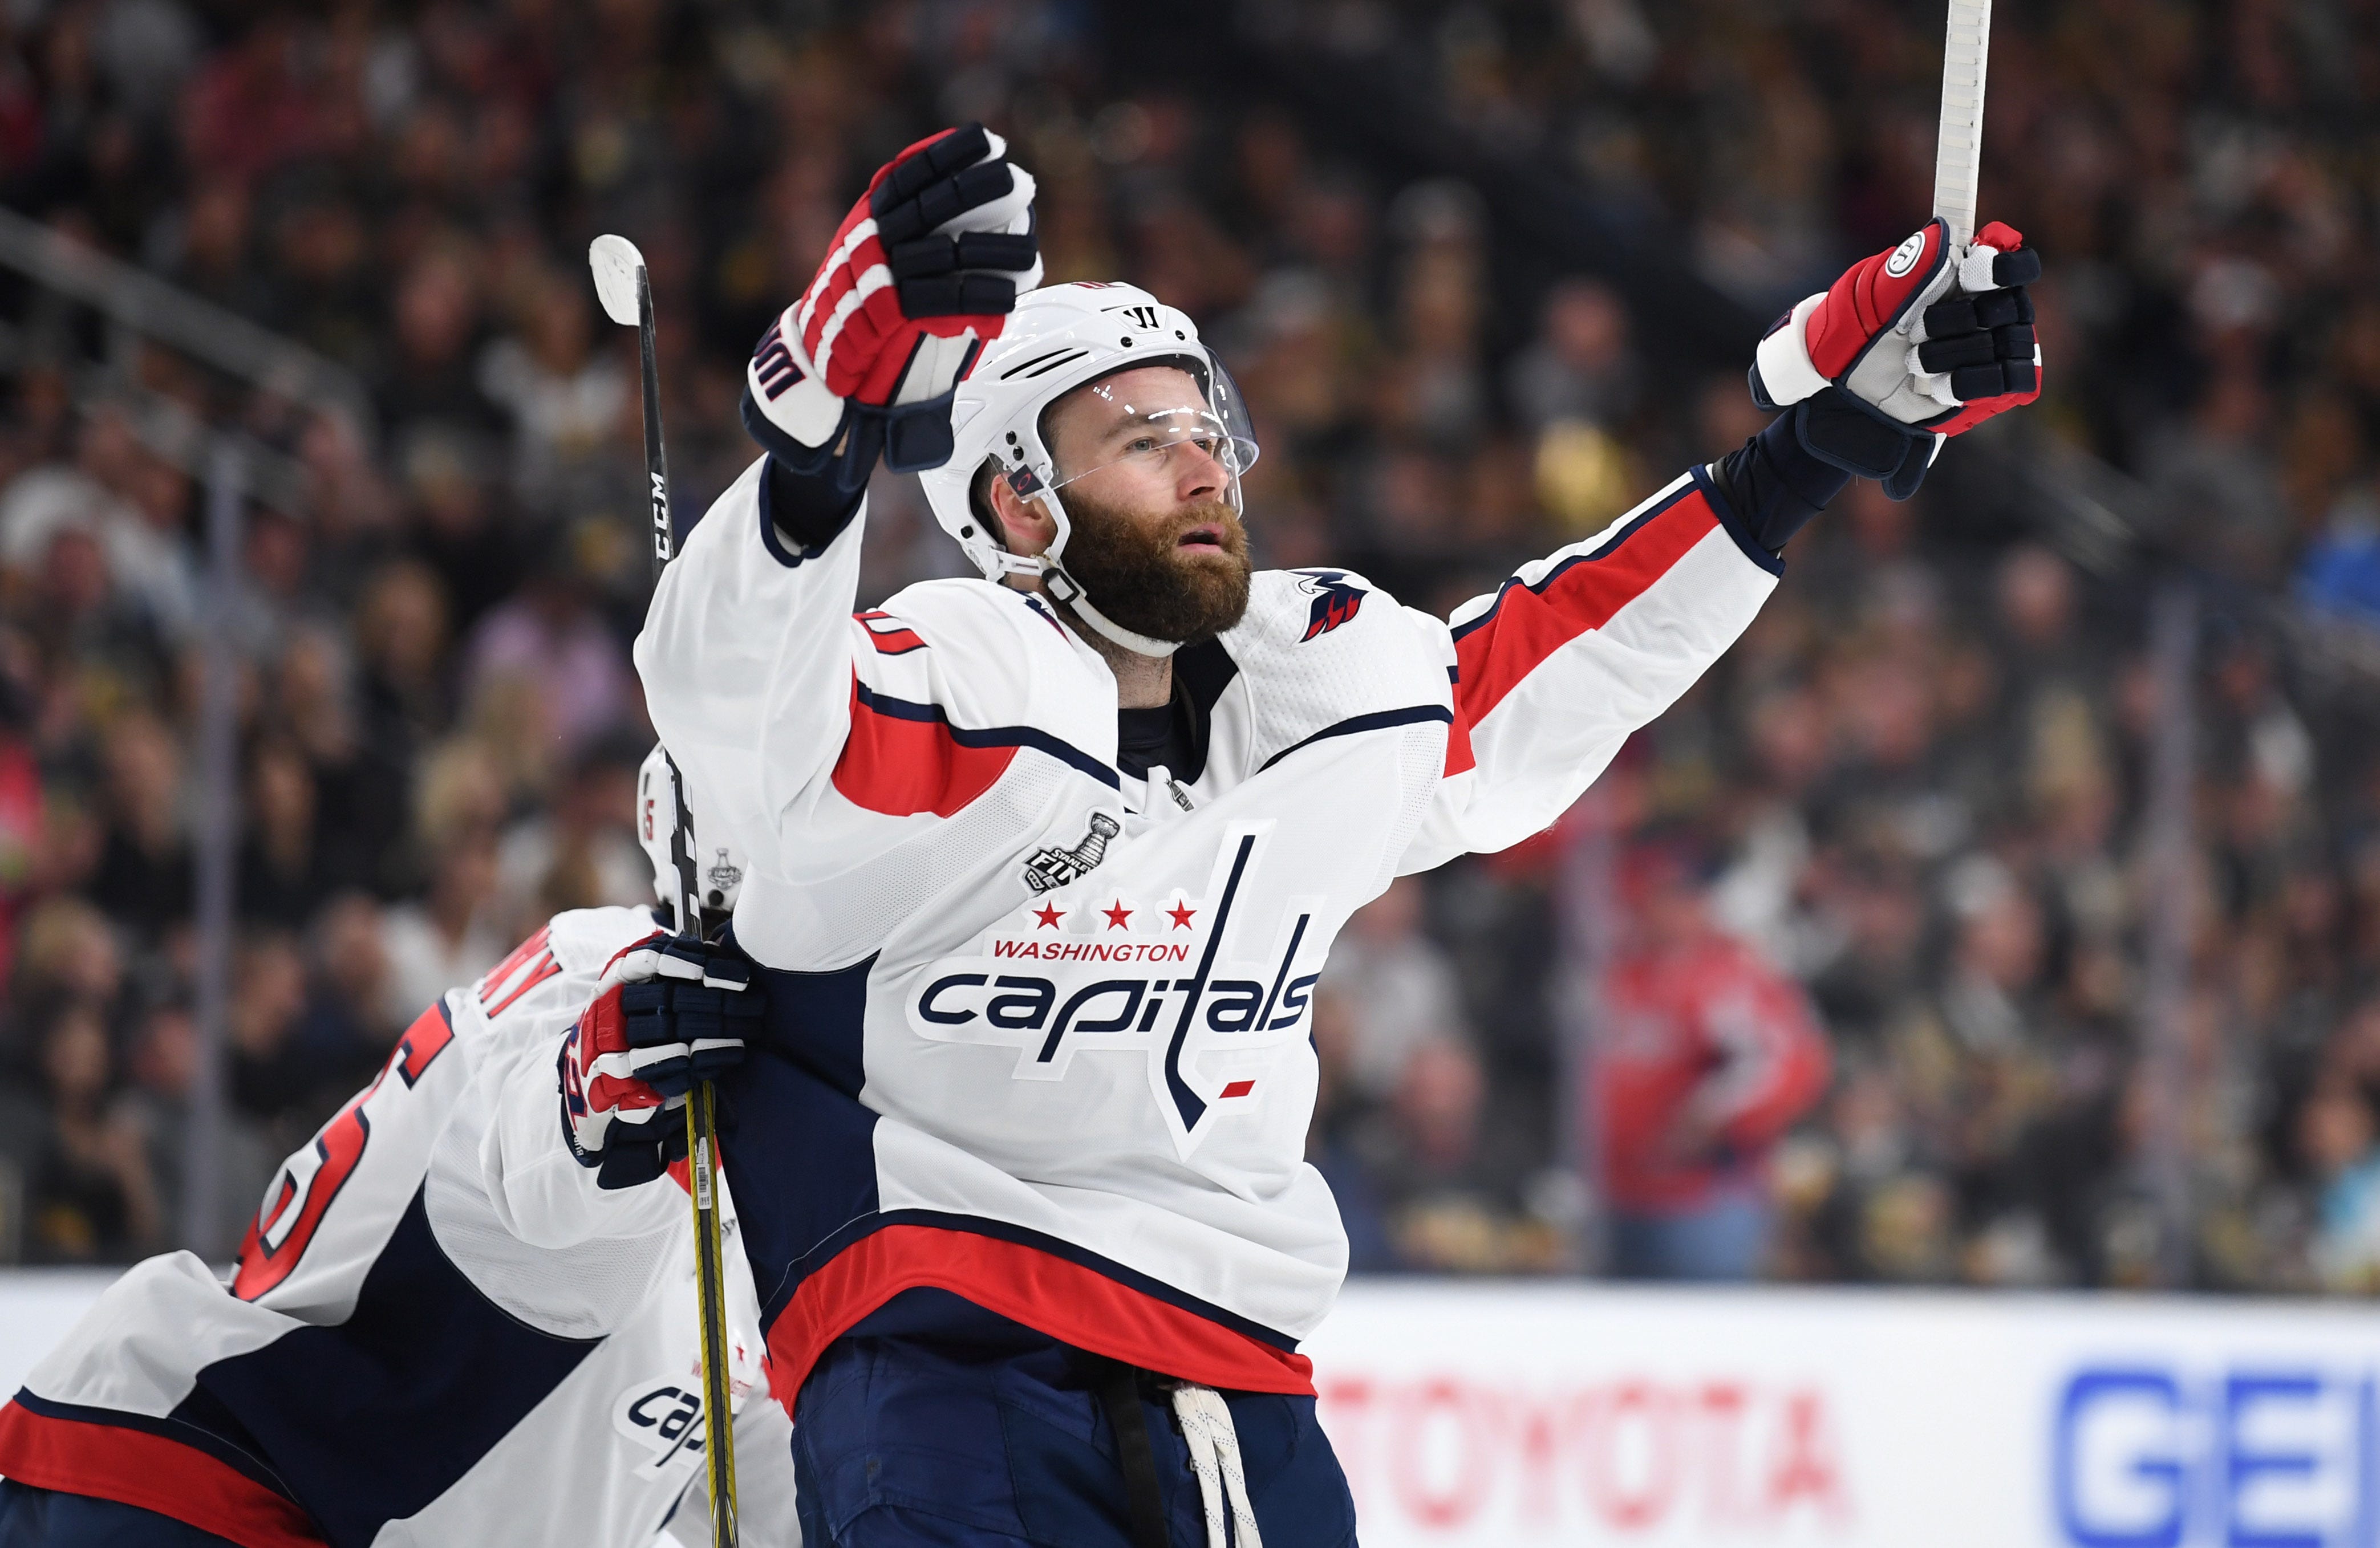 Washington Capitals right wing Brett Connolly celebrates after scoring a goal against the Vegas Golden Knights in the first period in Game 1 of the 2018 Stanley Cup Final at T-Mobile Arena in Las Vegas.